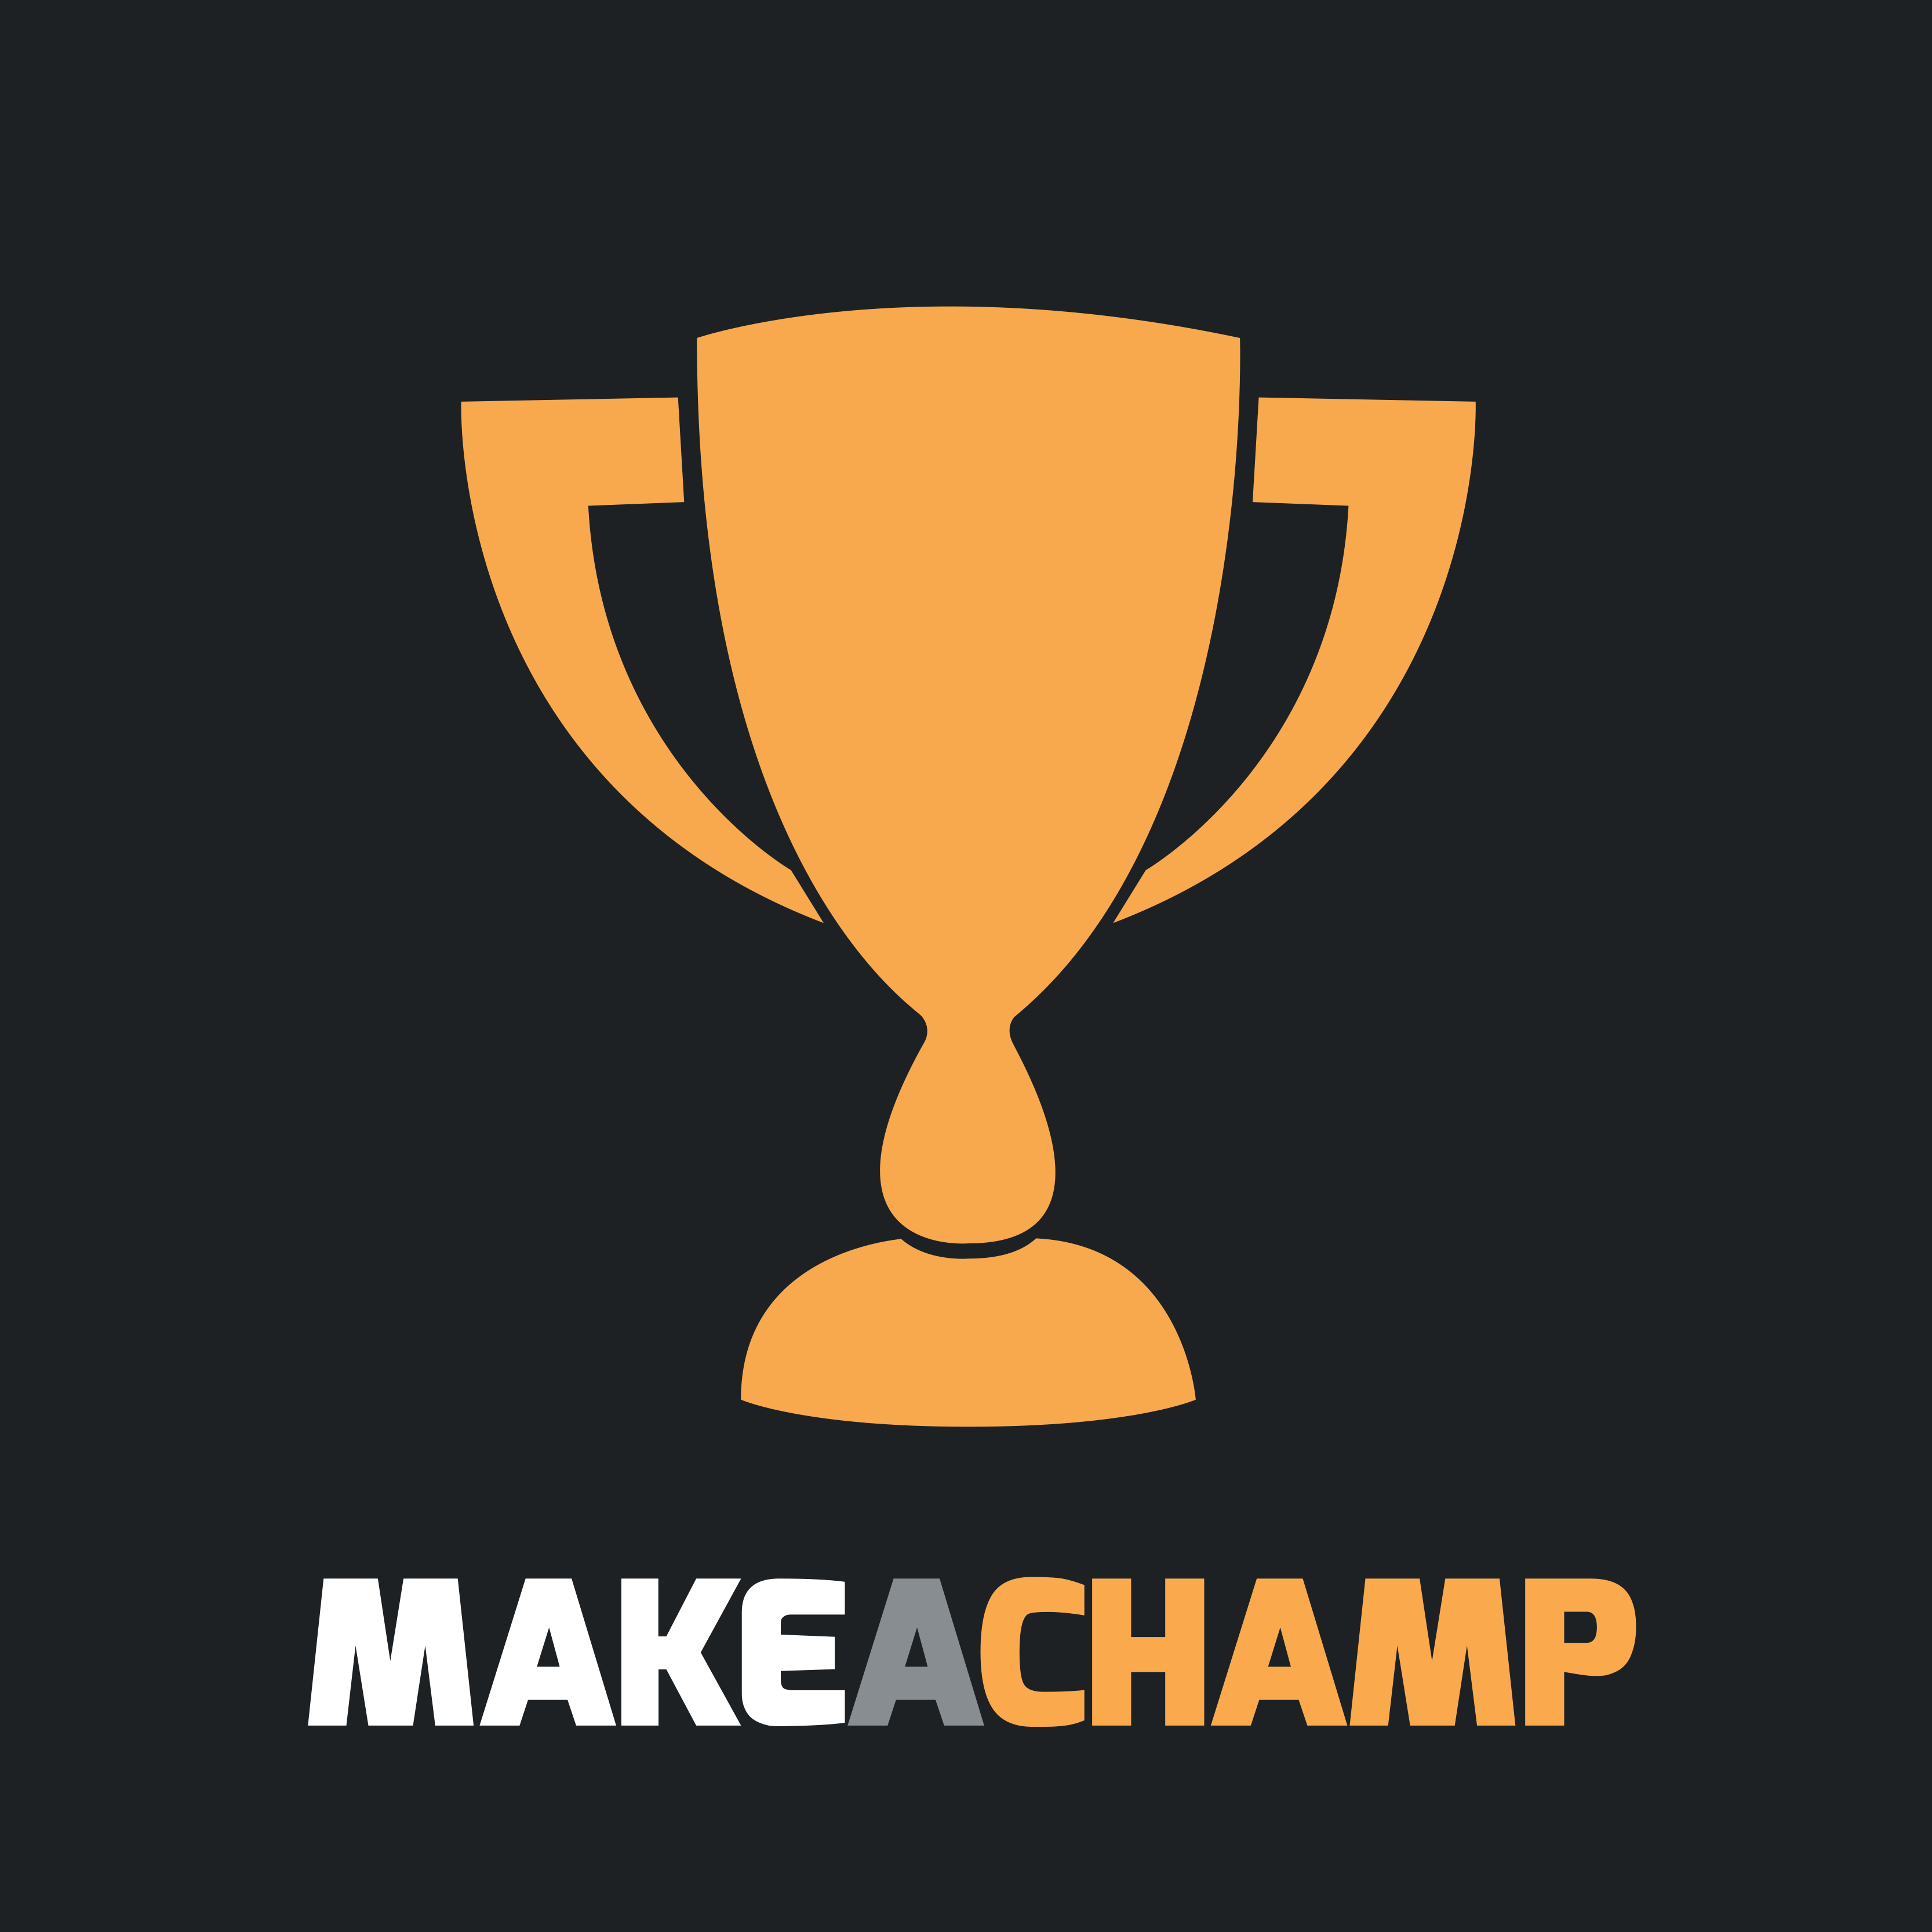 Over 2 million $ raised by athletes and teams. Fund your next @wrestling, Asian, PanAm and other tournaments with MAKEACHAMP! Join Free!  Tweets by @ancorjudo